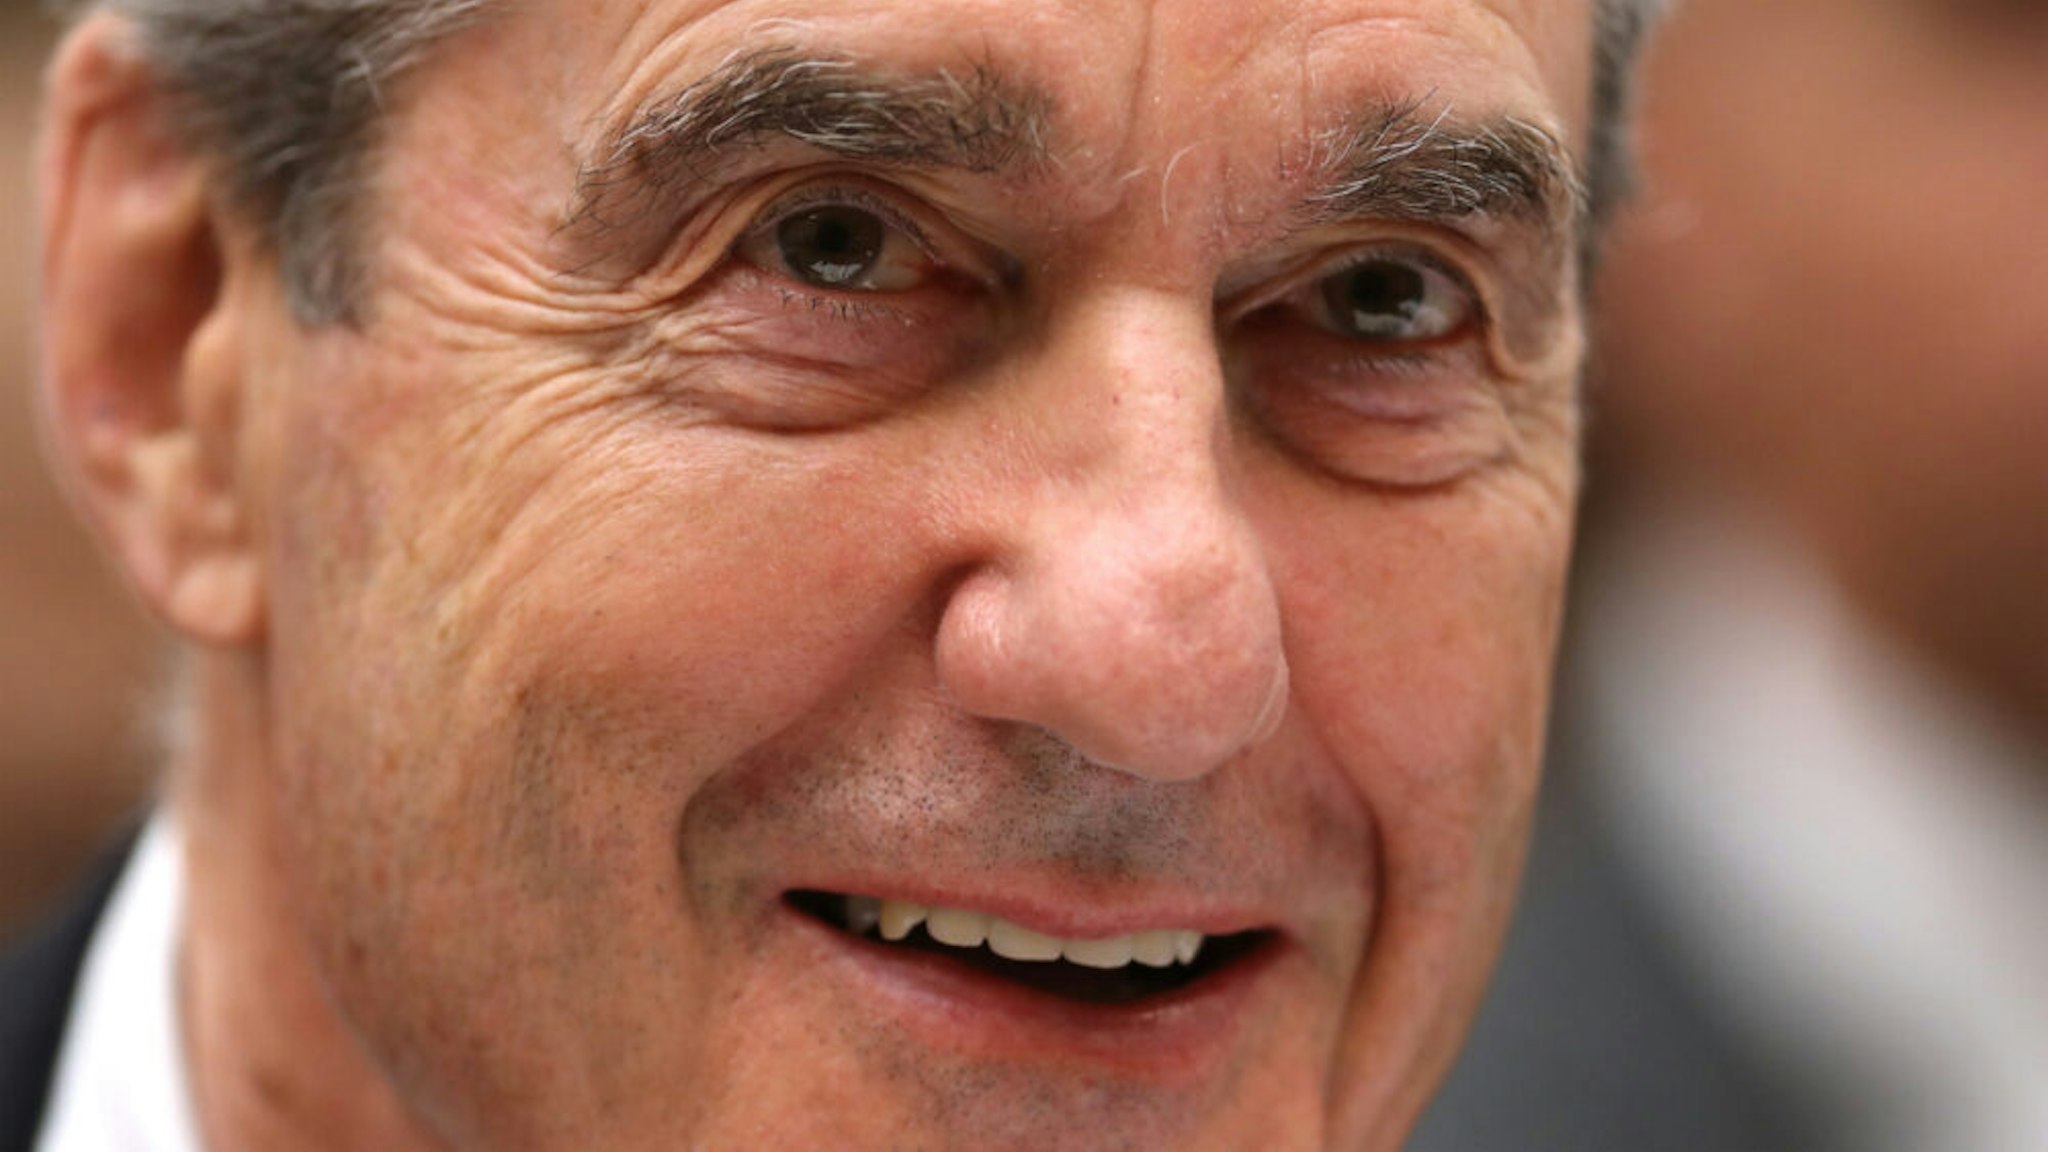 WASHINGTON, DC - JULY 24: Former Special Counsel Robert Mueller testifies before the House Judiciary Committee about his report on Russian interference in the 2016 presidential election in the Rayburn House Office Building July 24, 2019 in Washington, DC. Mueller, along with former Deputy Special Counsel Aaron Zebley, will later testify before the House Intelligence Committee in back-to-back hearings on Capitol Hill.